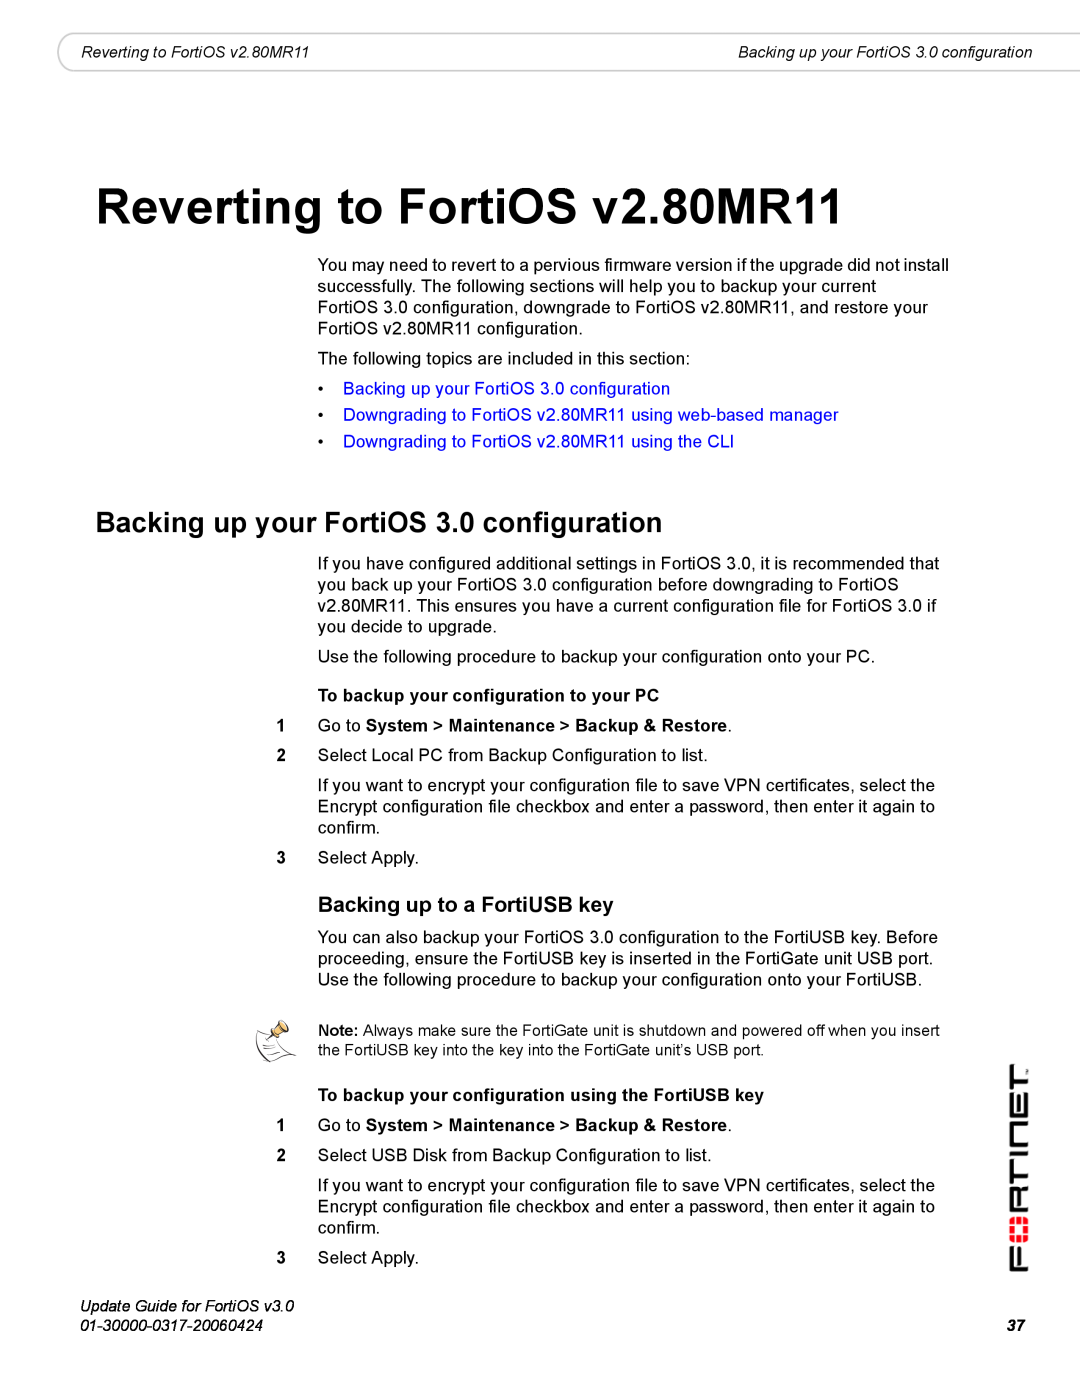 Fortinet manual Reverting to FortiOS v2.80MR11, Backing up your FortiOS 3.0 configuration, Backing up to a FortiUSB key 